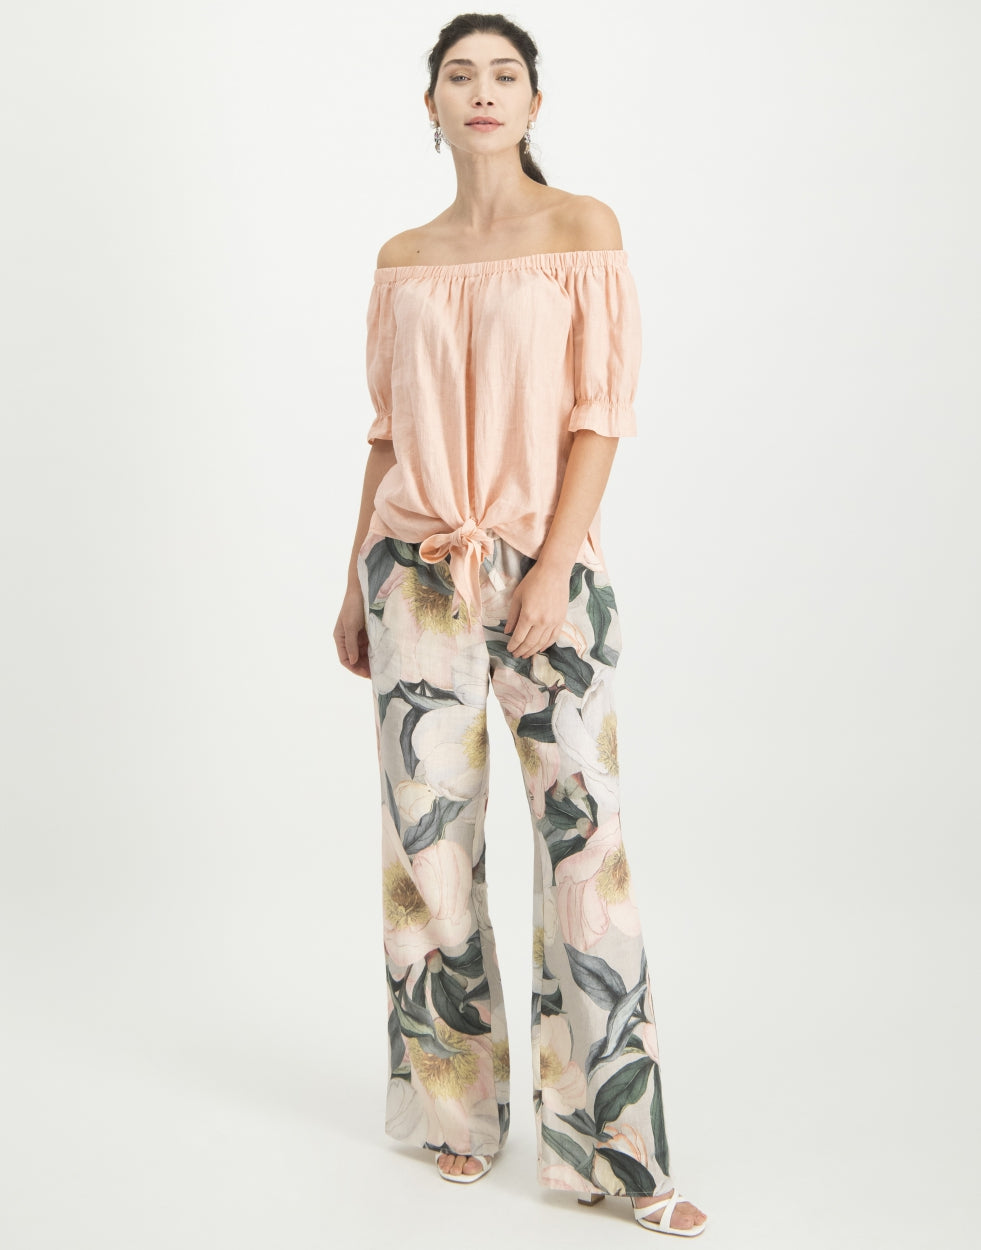 Nicole Knotted Top | Rose